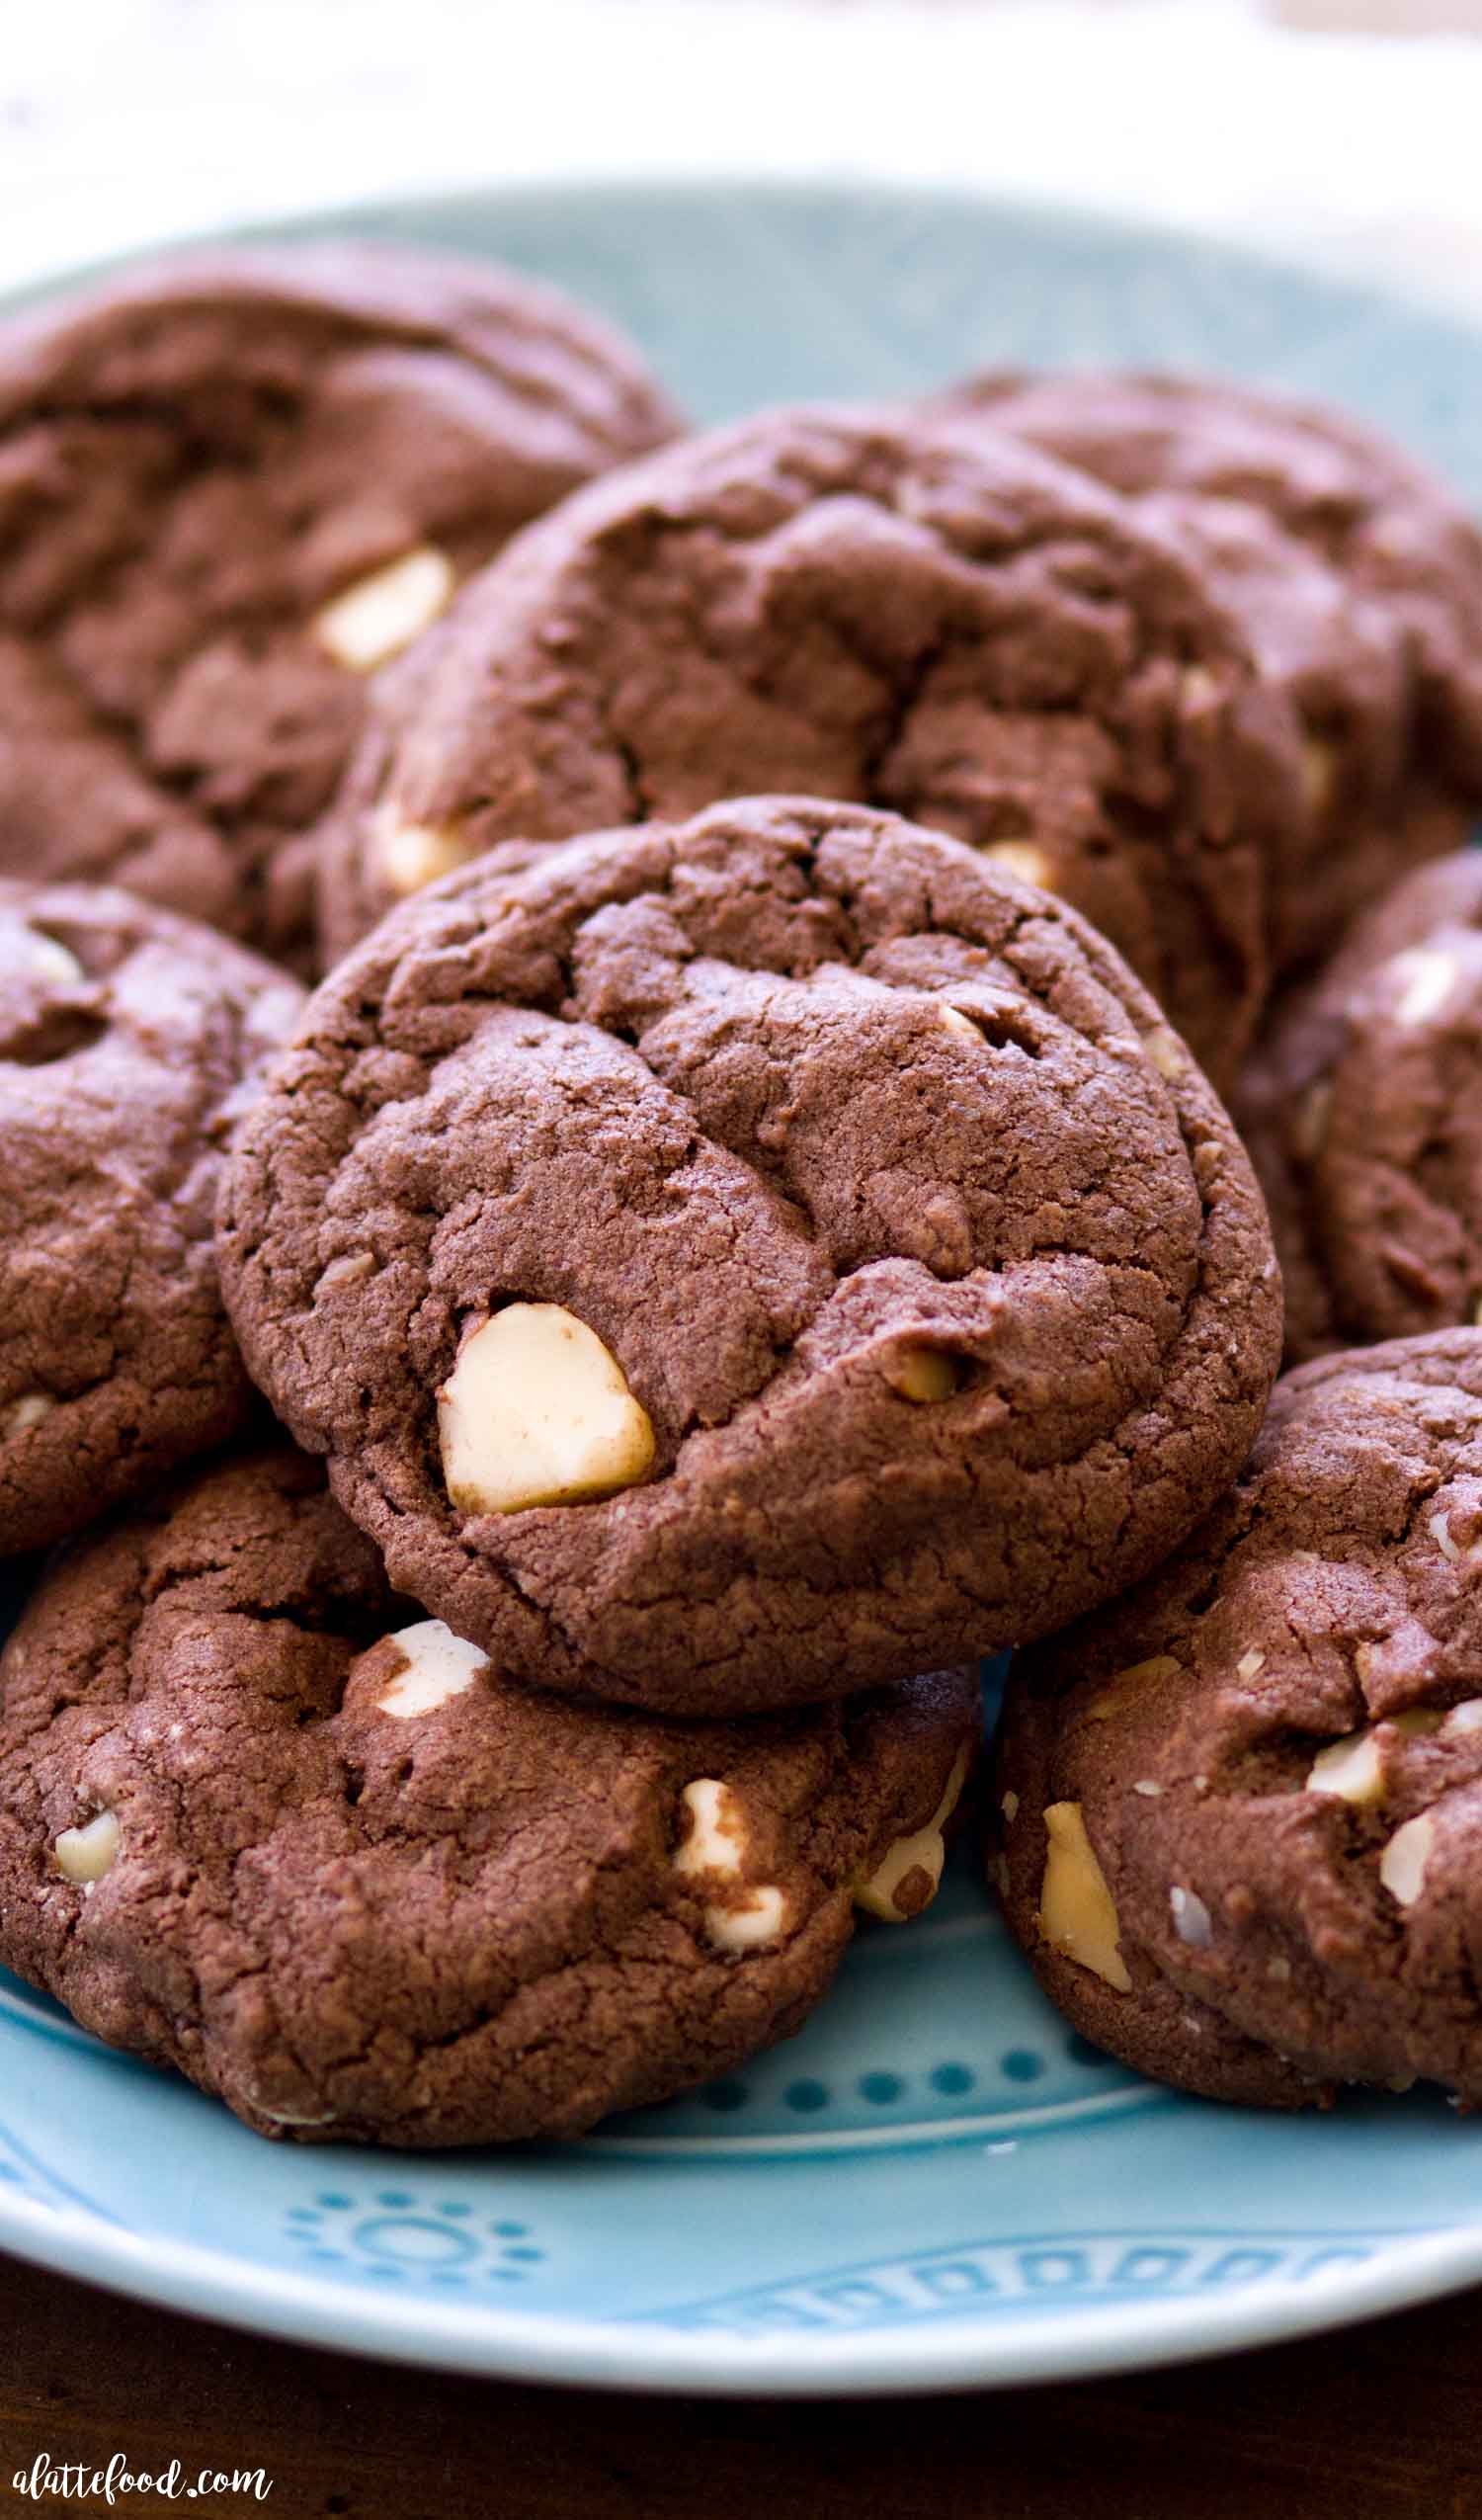 Chocolate Chip Cookies with Macadamia Nuts